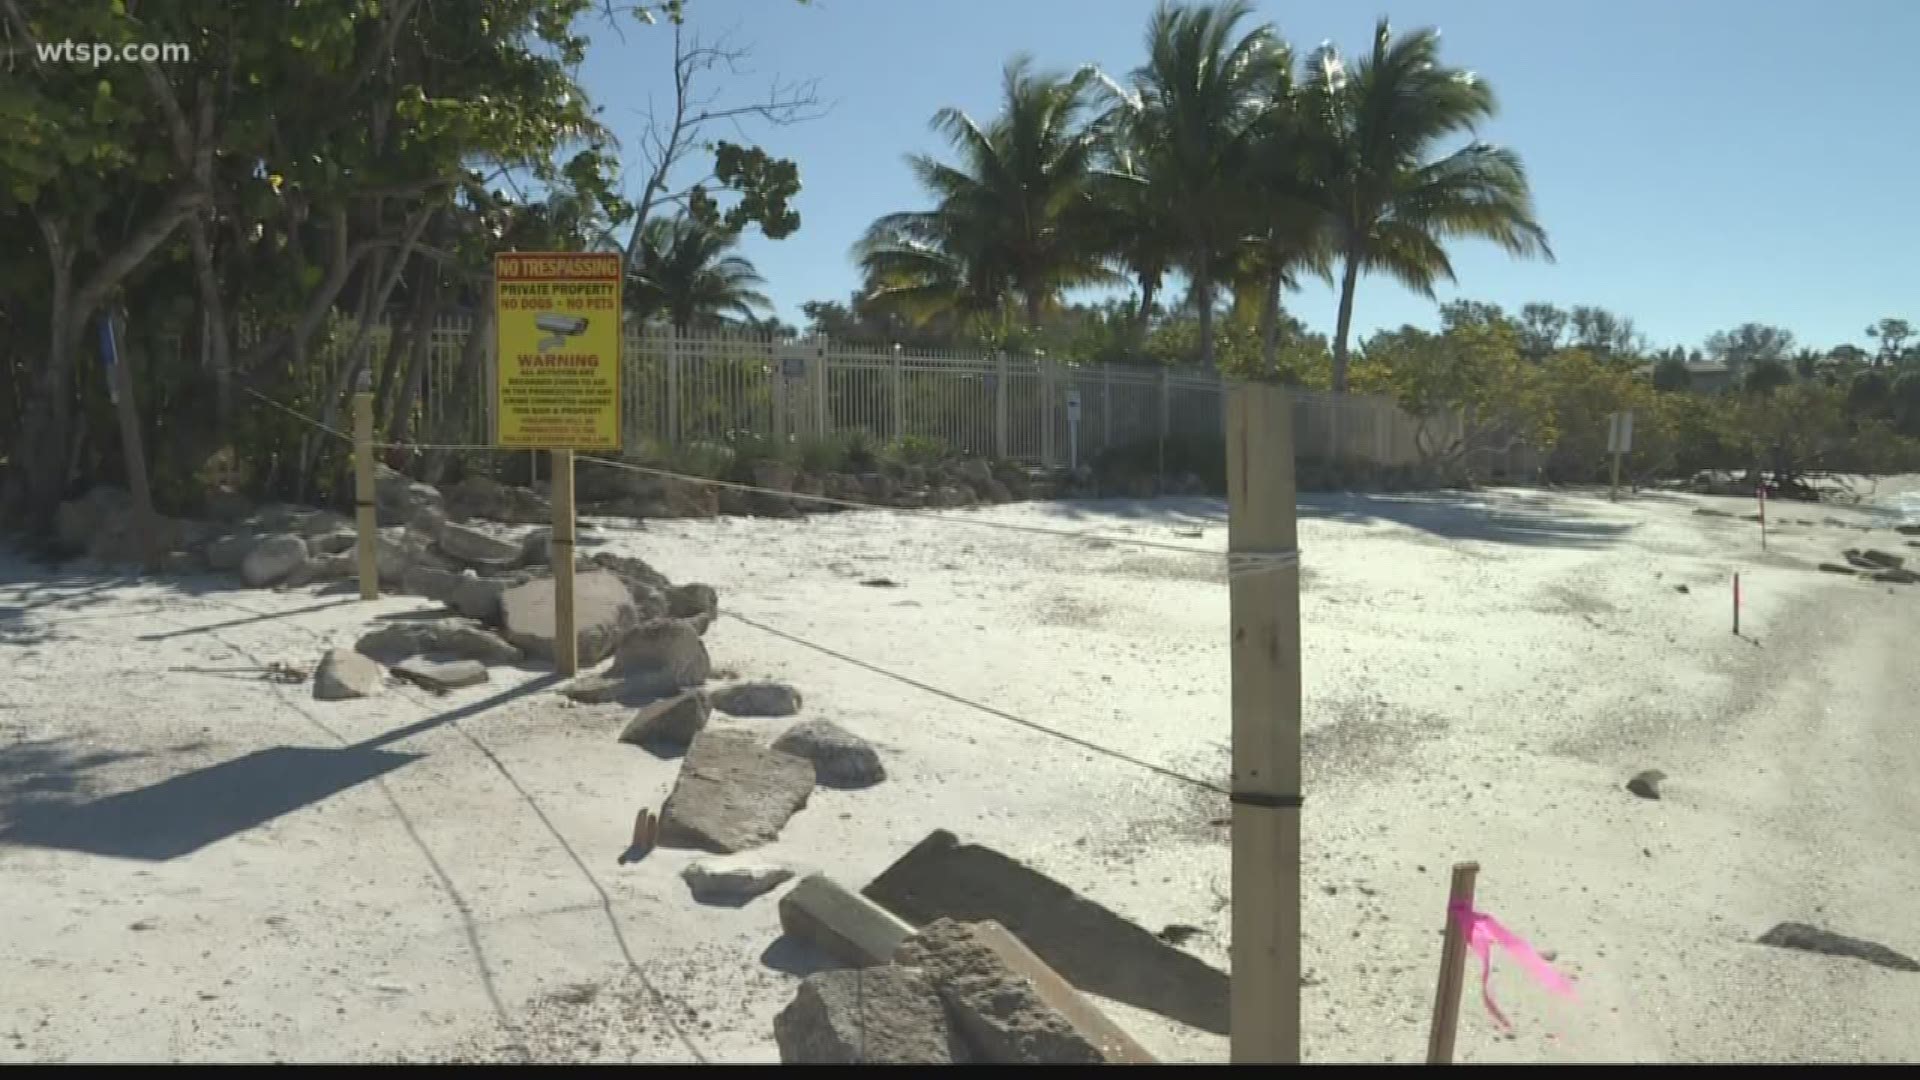 The battle continues over a rope fence, rocks and "no trespassing" signs put up on Shell Road in Siesta Key by a homeowner.